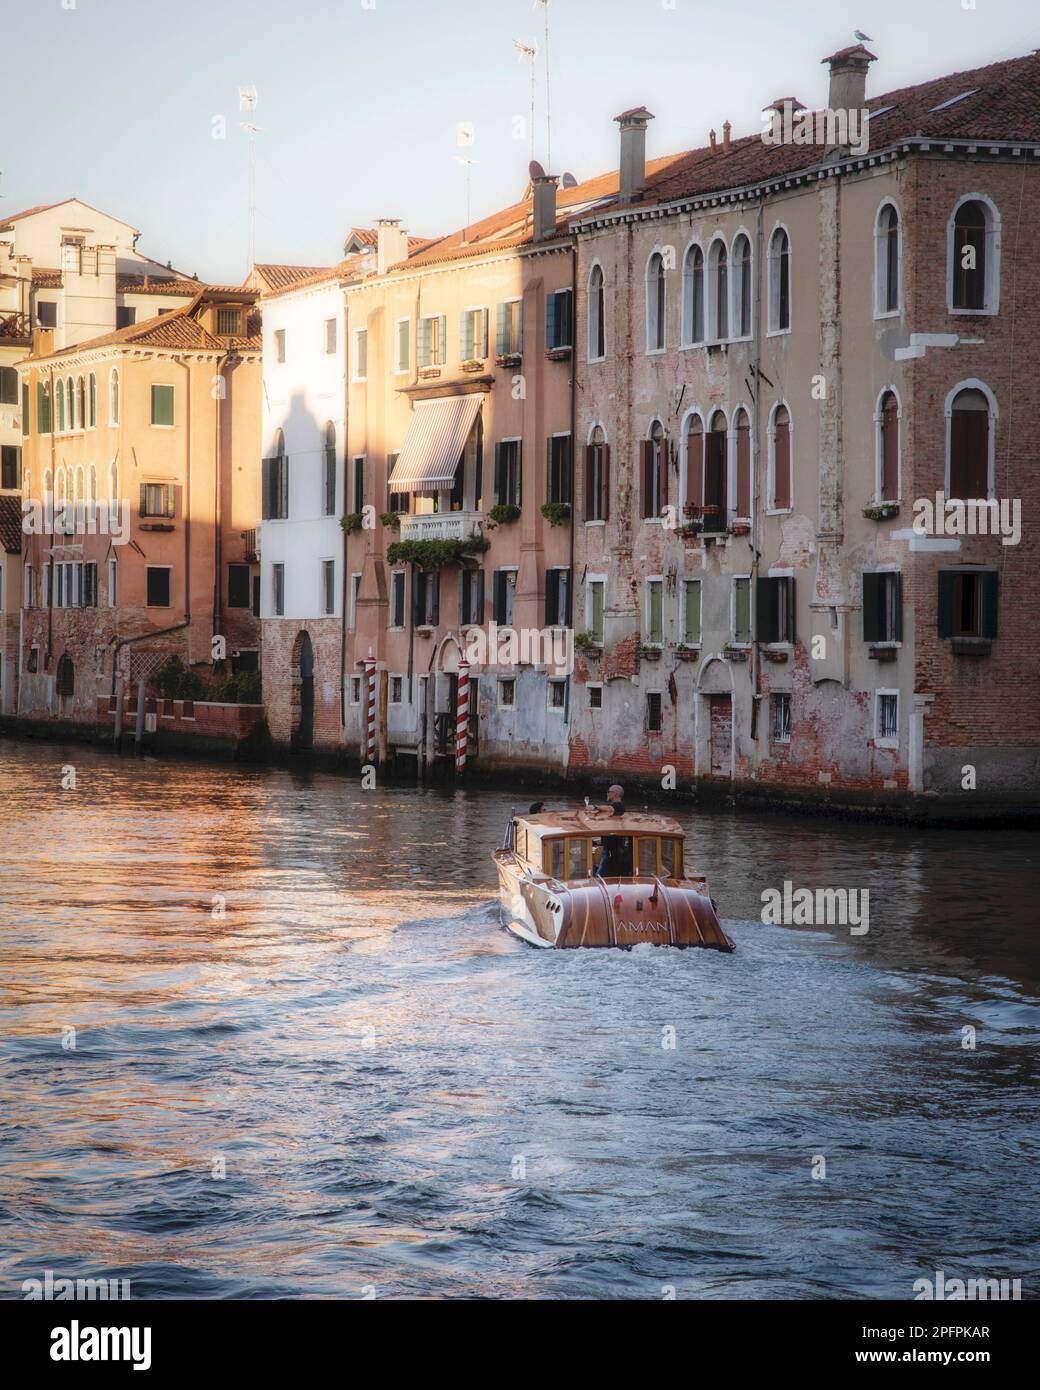 Venice’s Grand Canal is the main channel through the historic city. Stock Photo